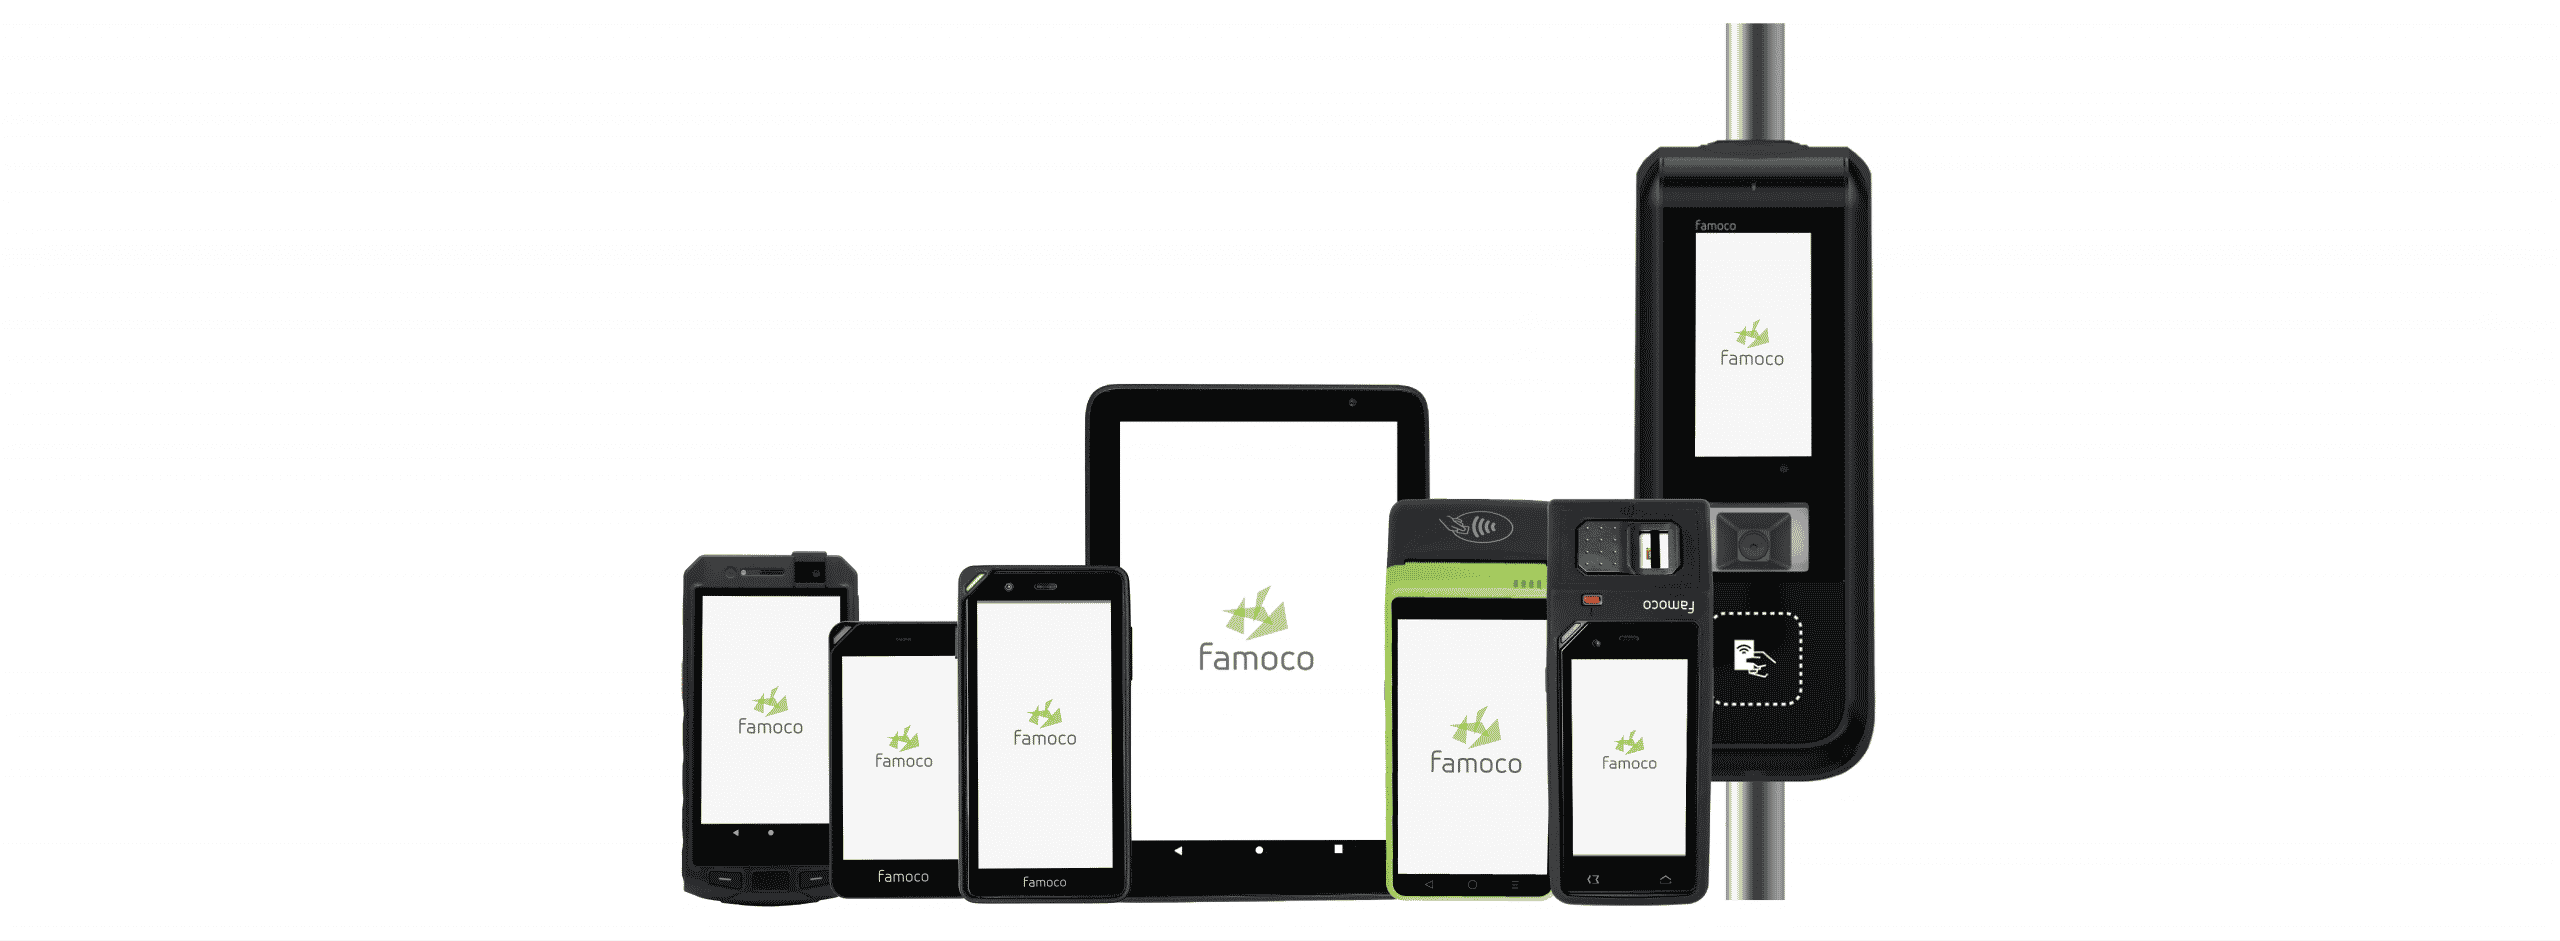 All_devices_2022_1920x706